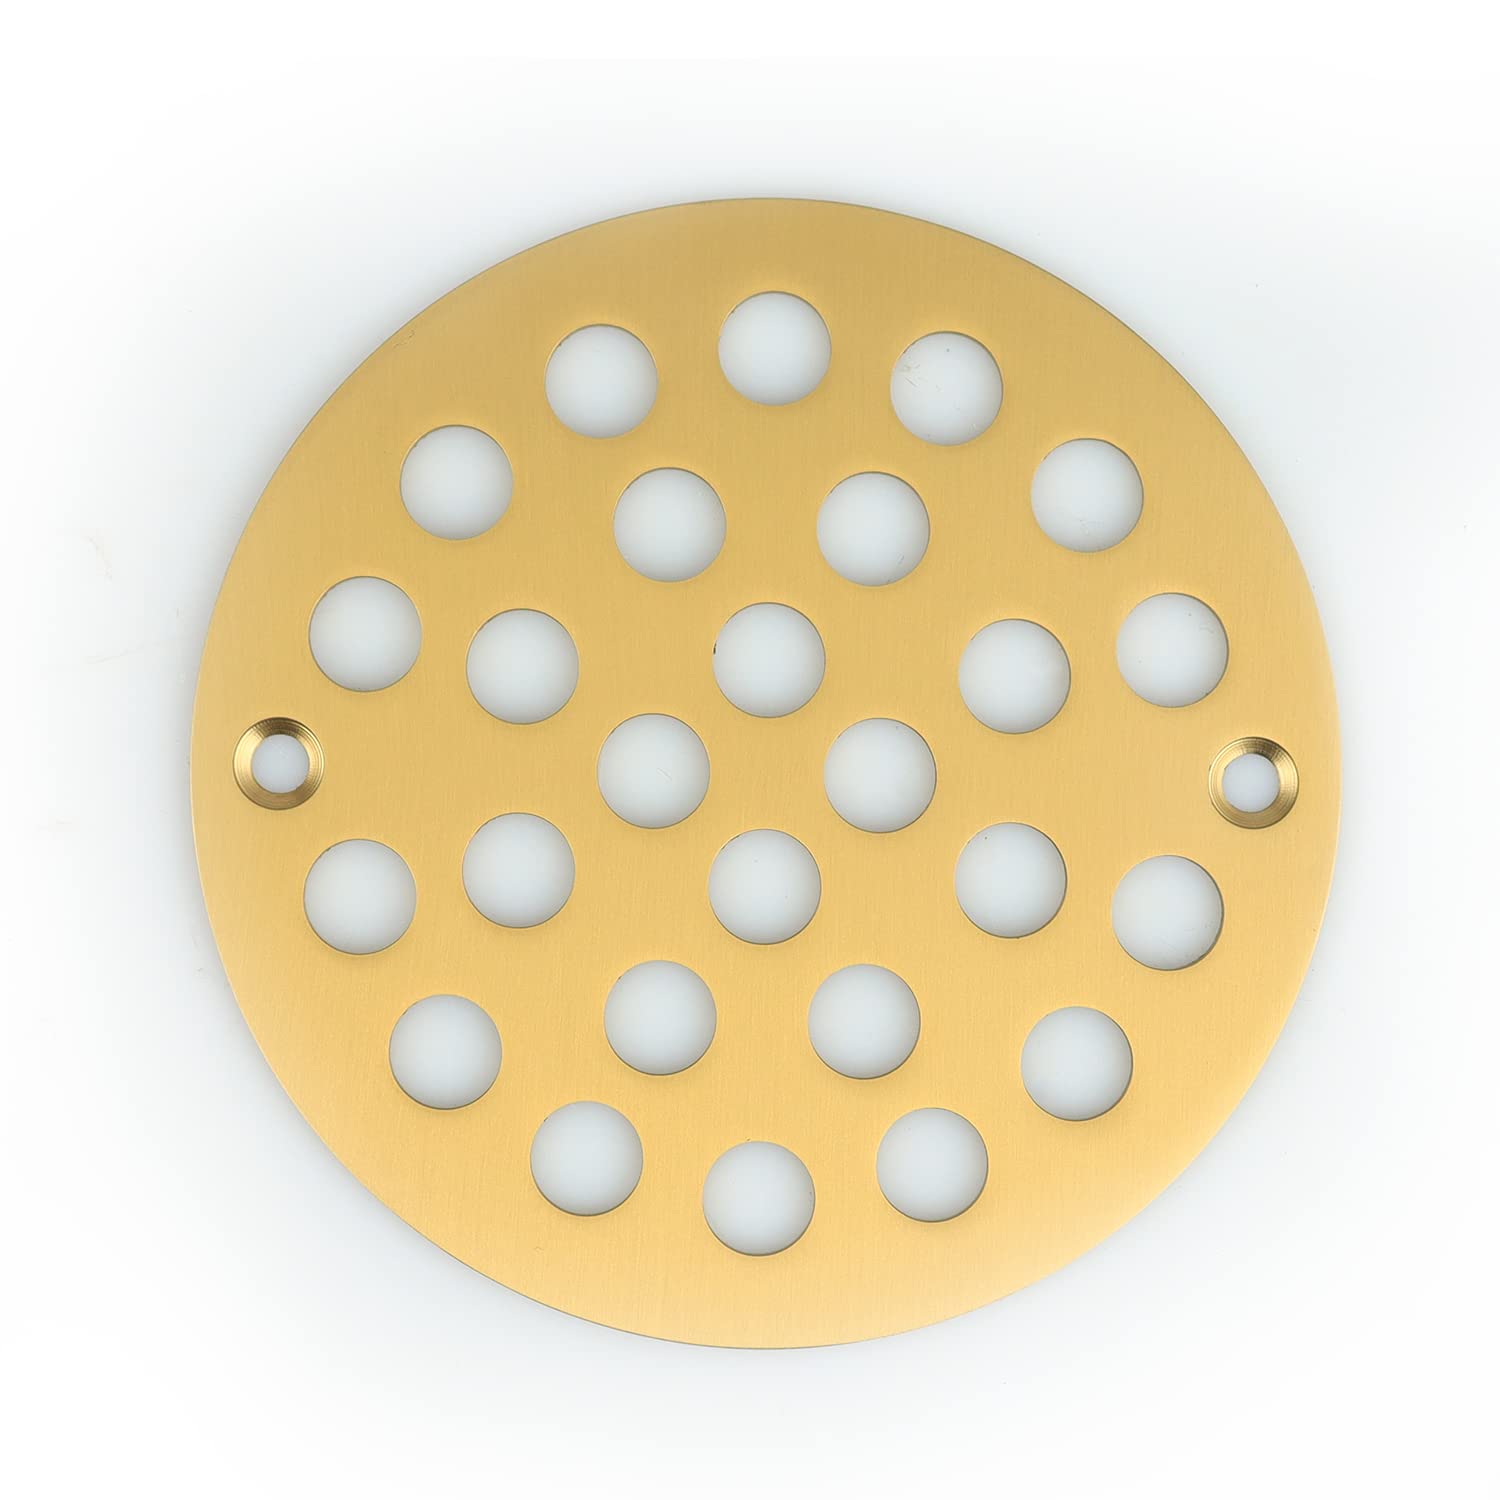 Poyde 4 Inch Screw-in Round Shower Drain Cover Replacement Floor Drainer with Screws (Brushed Golden)